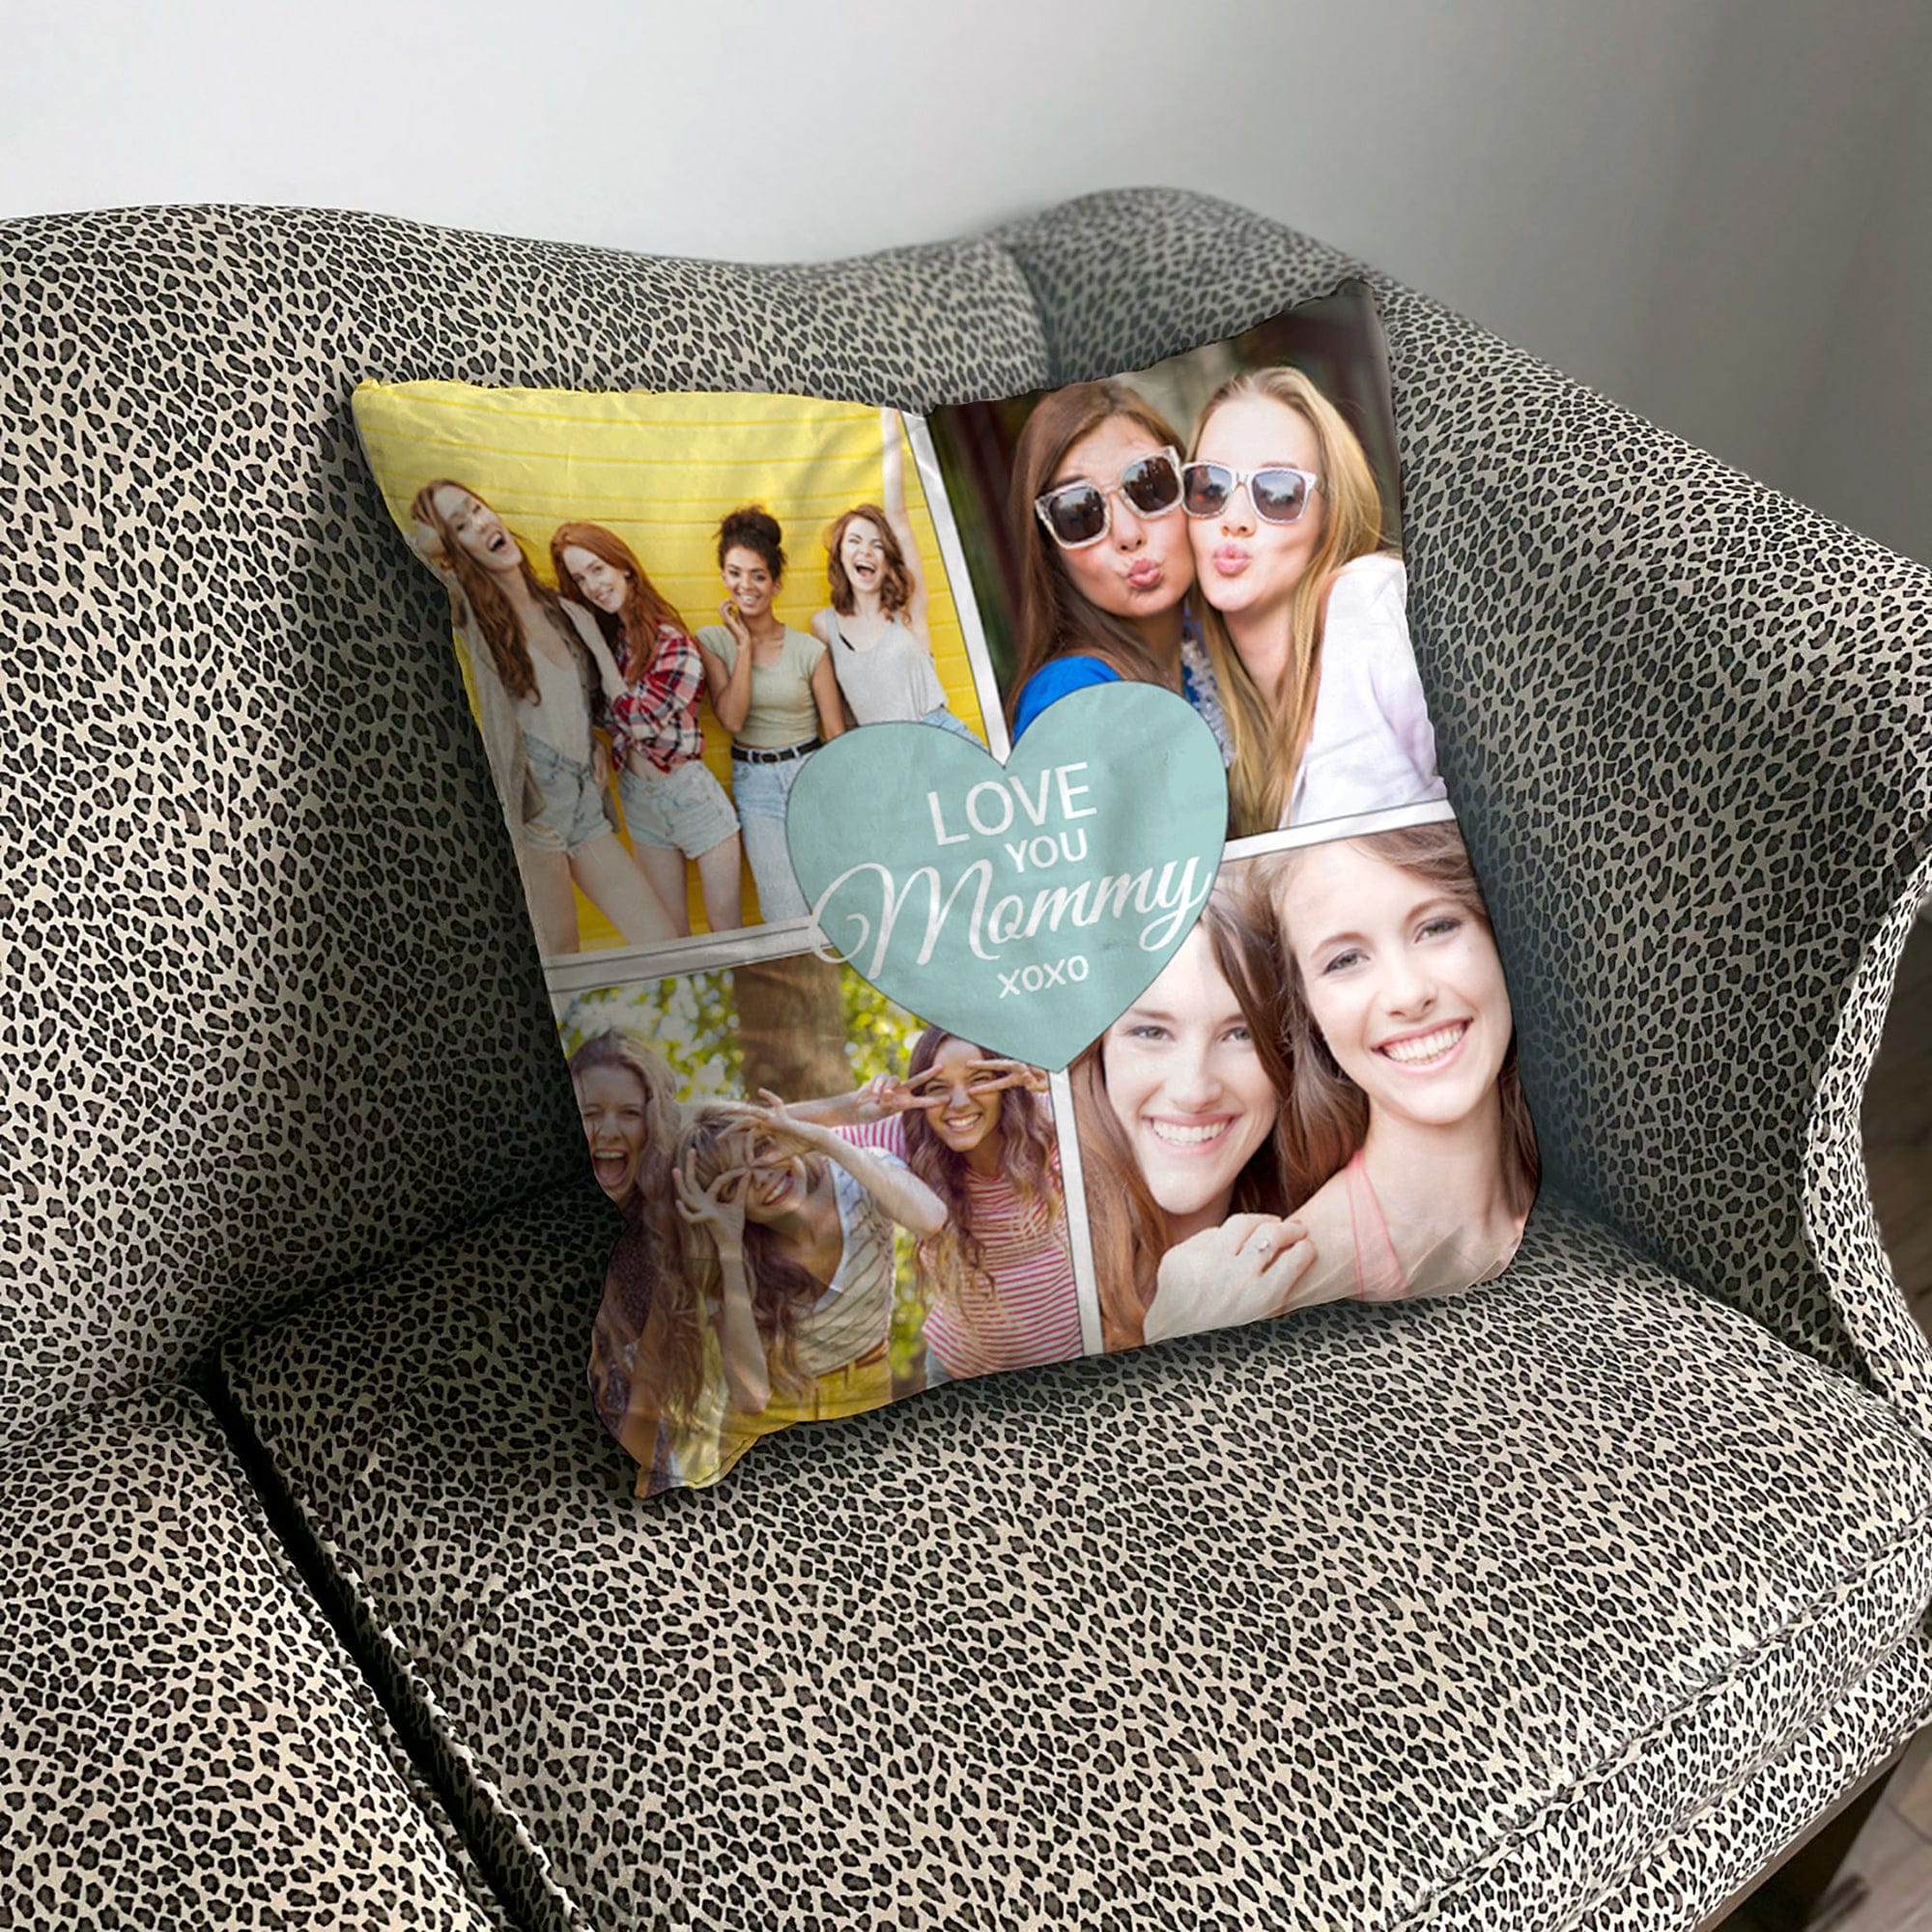 Personalized Monogram Pillow Covers